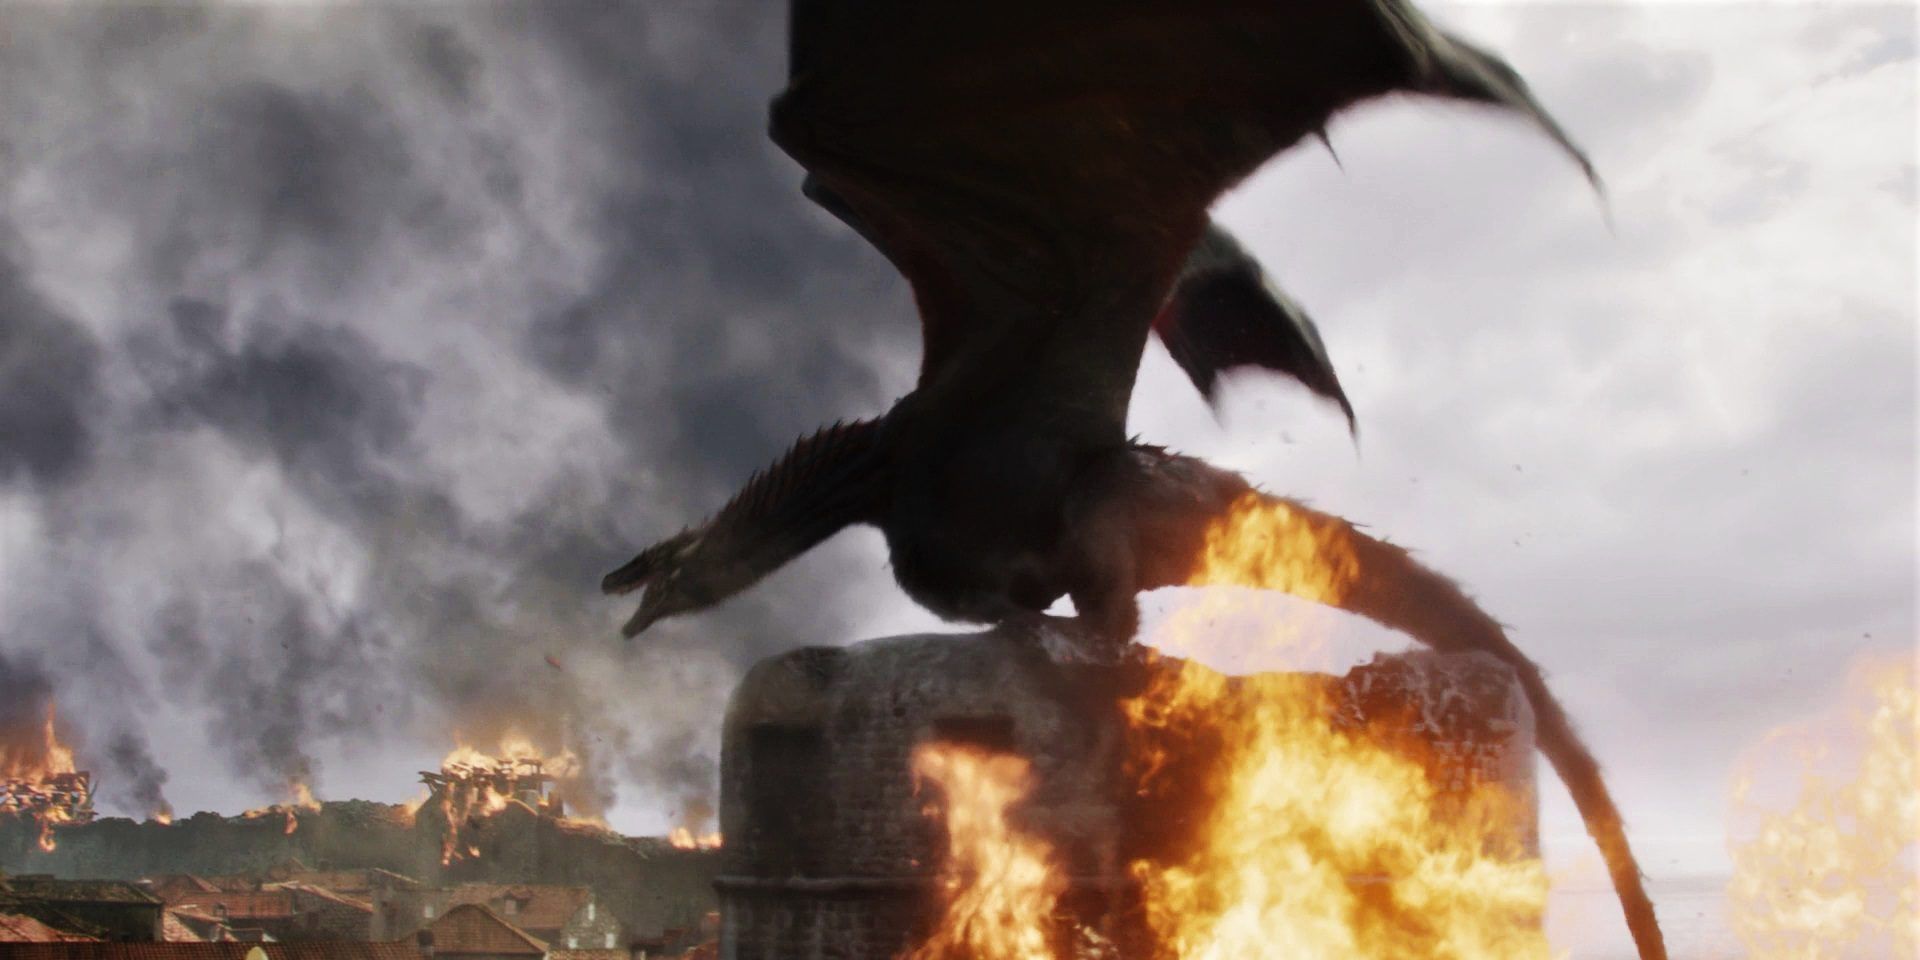 Drogon perched on a flaming building